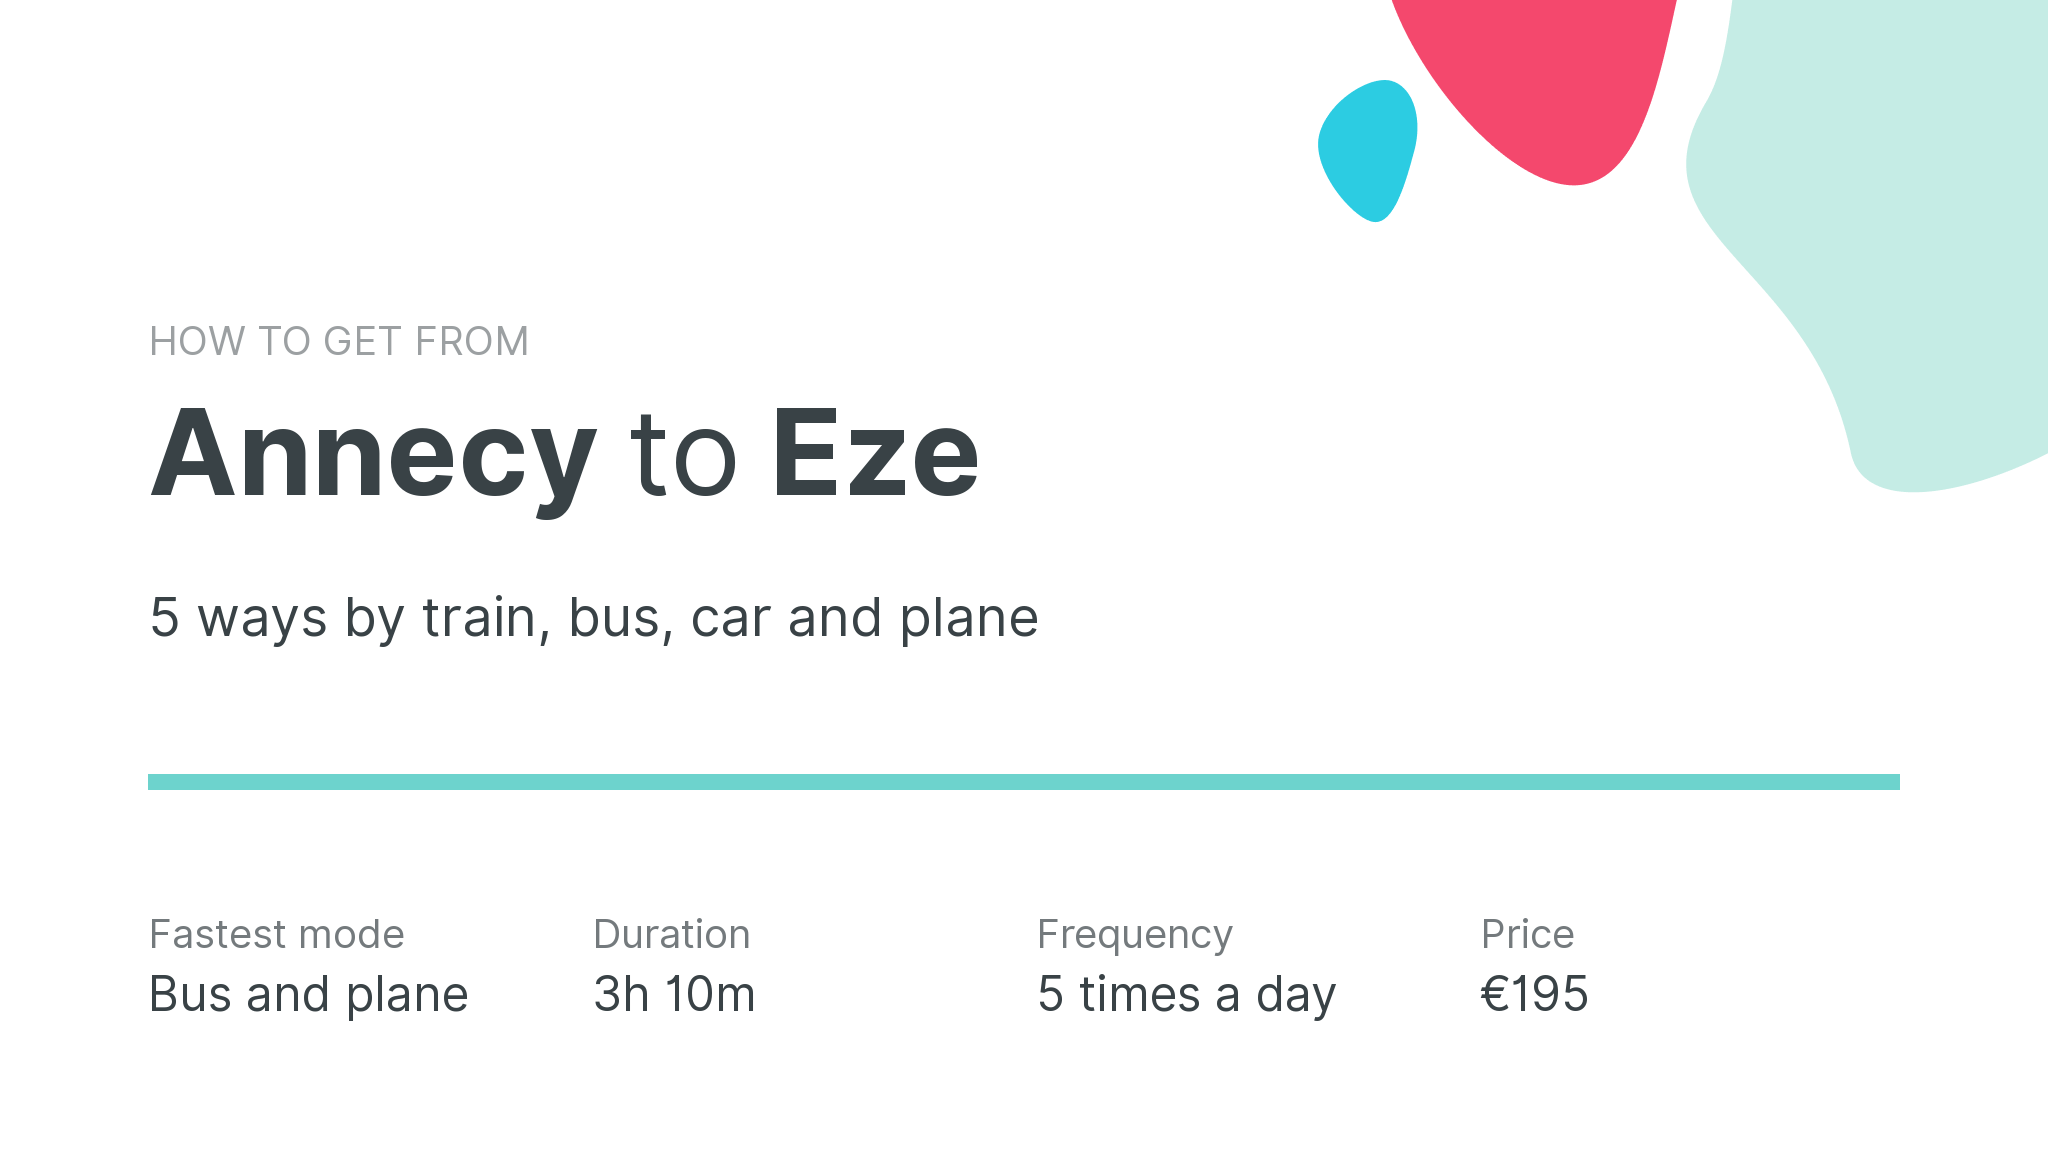 How do I get from Annecy to Eze